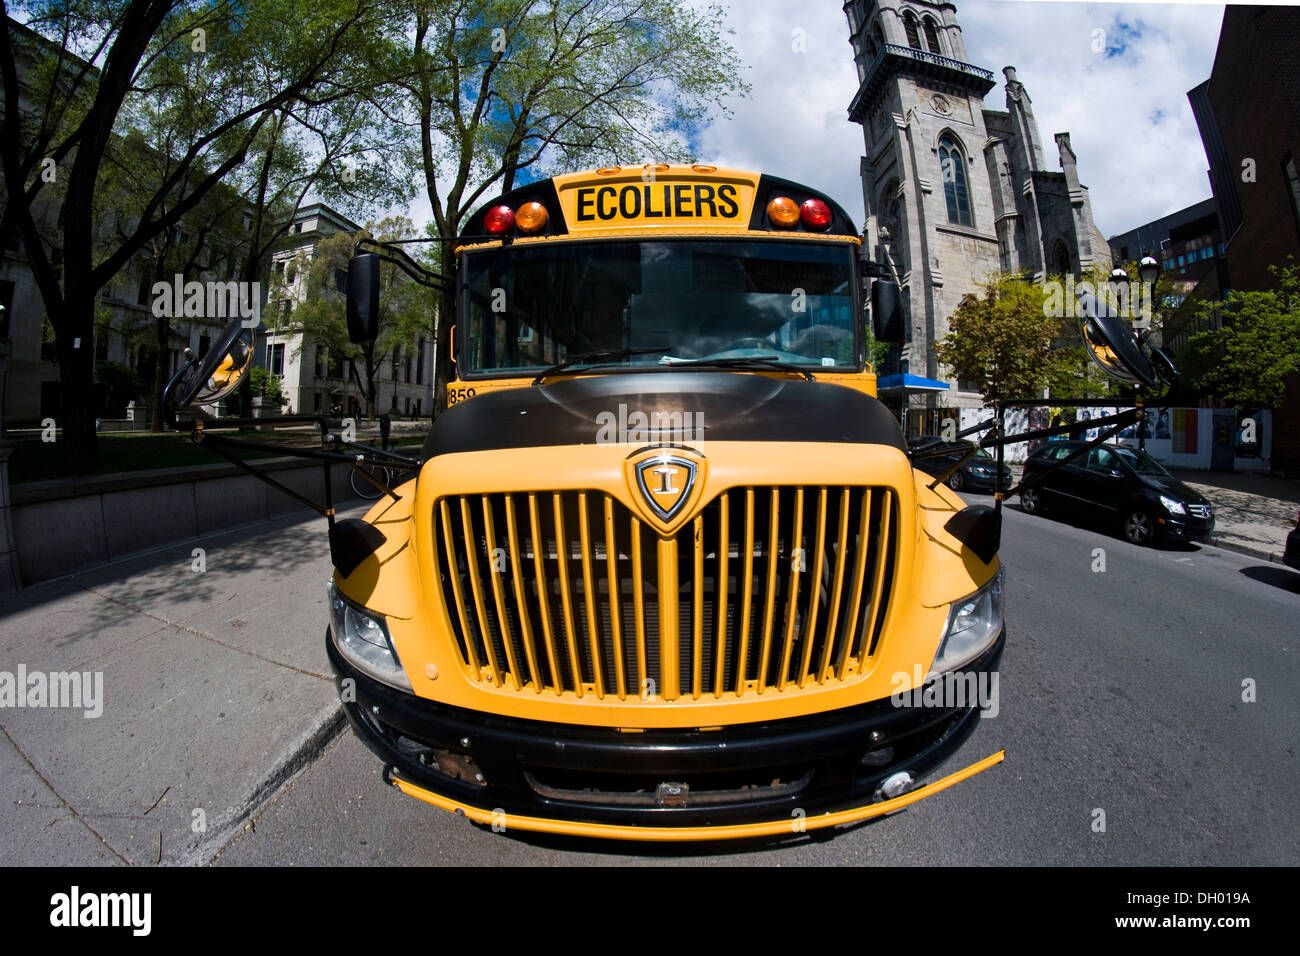 A Canadian school bus Stock Photo